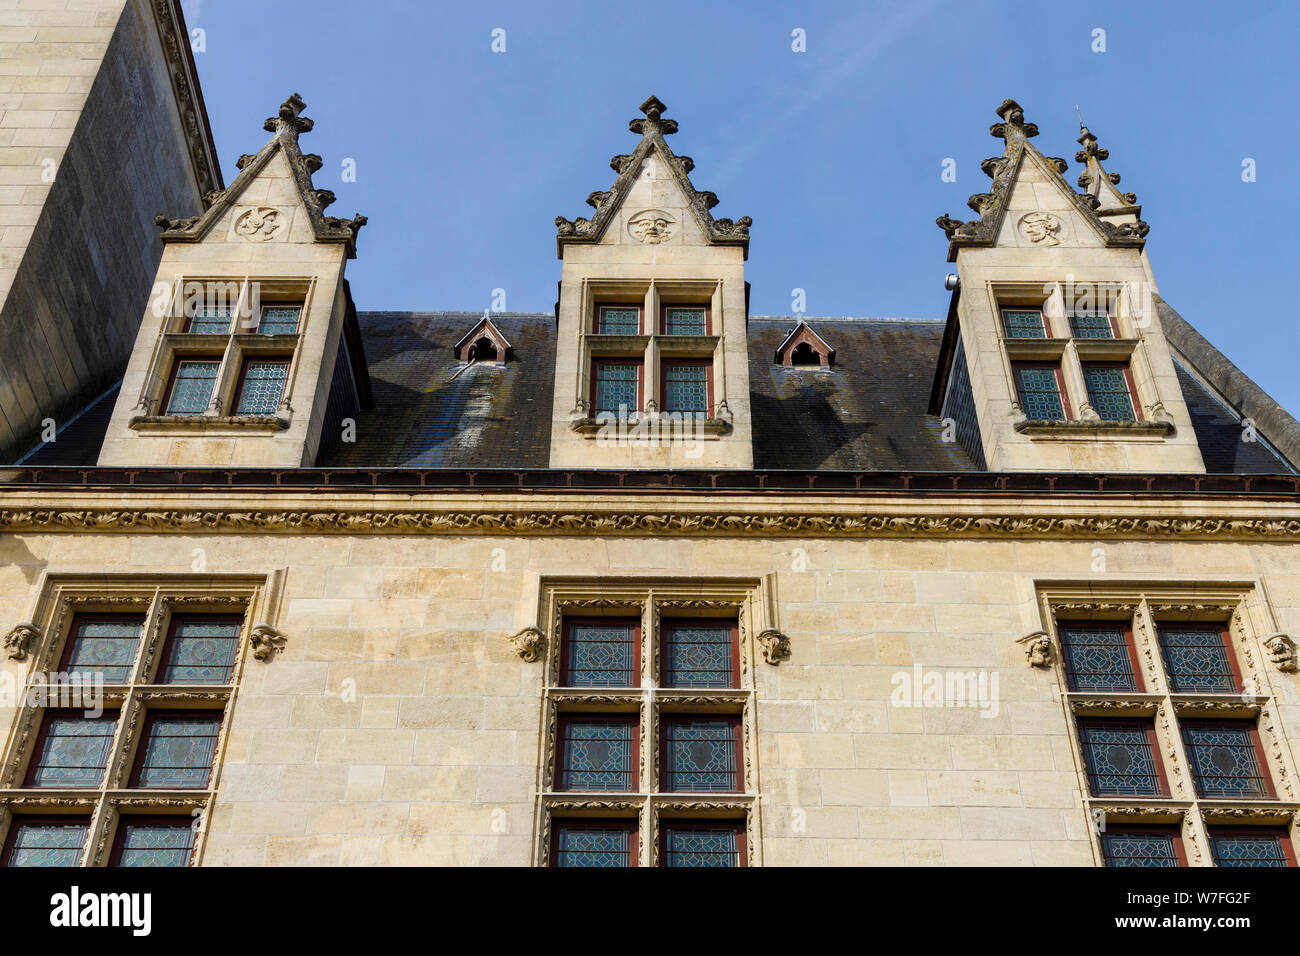 Detail of the 1914 Neo-Gothic Libourne Town Hall, near Bordeaux, in the Gironde department, France. Dorma styled window. Stock Photo